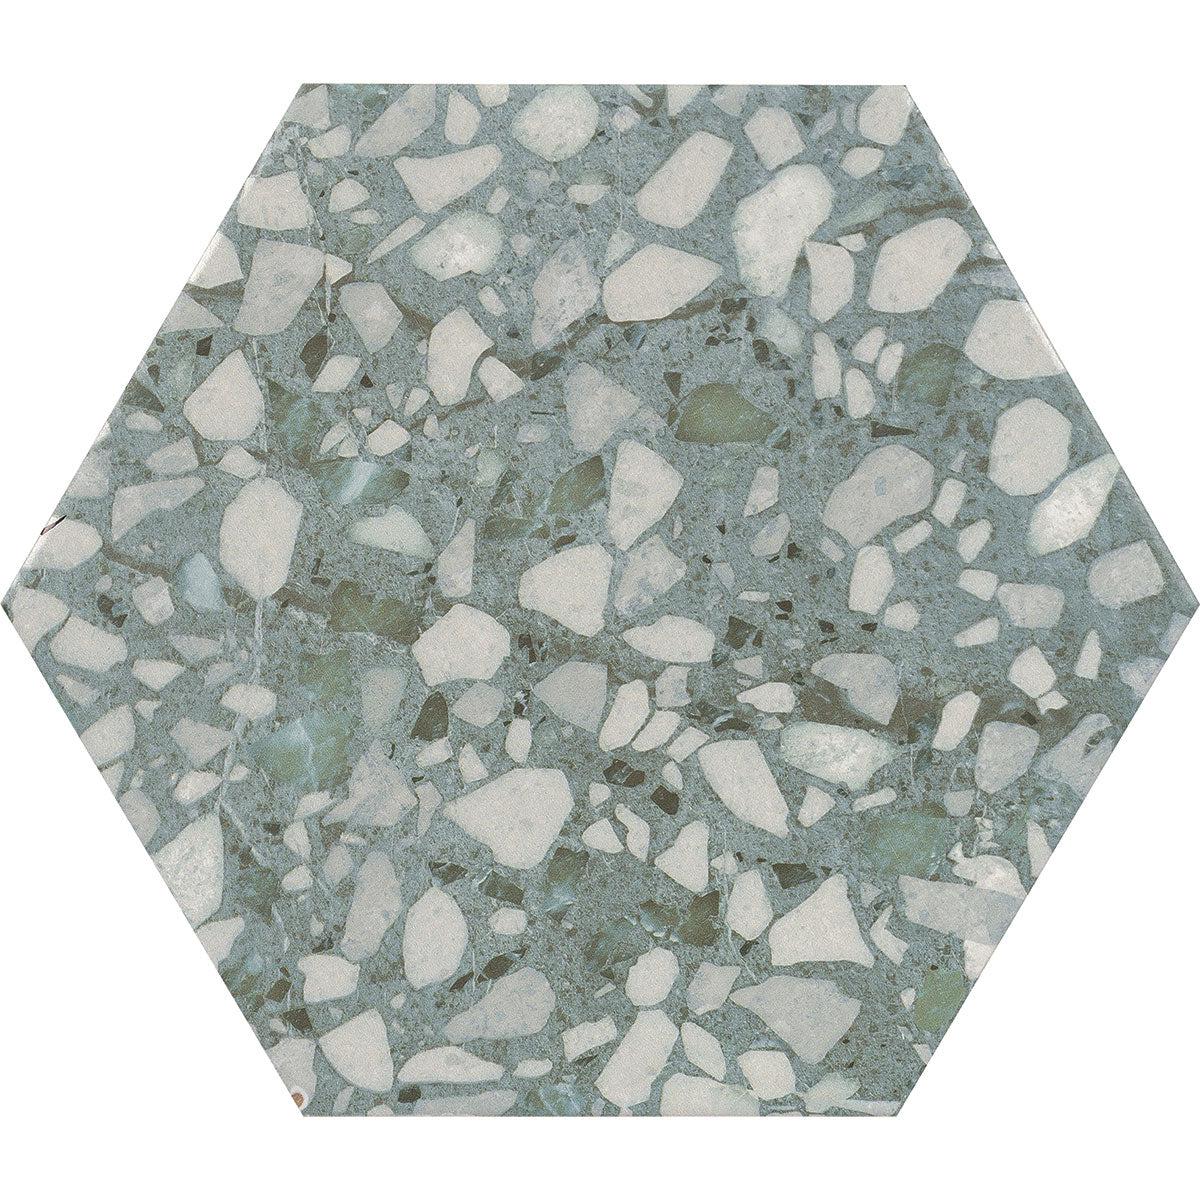 Agave Green Terrazzo Hex Porcelain Tile